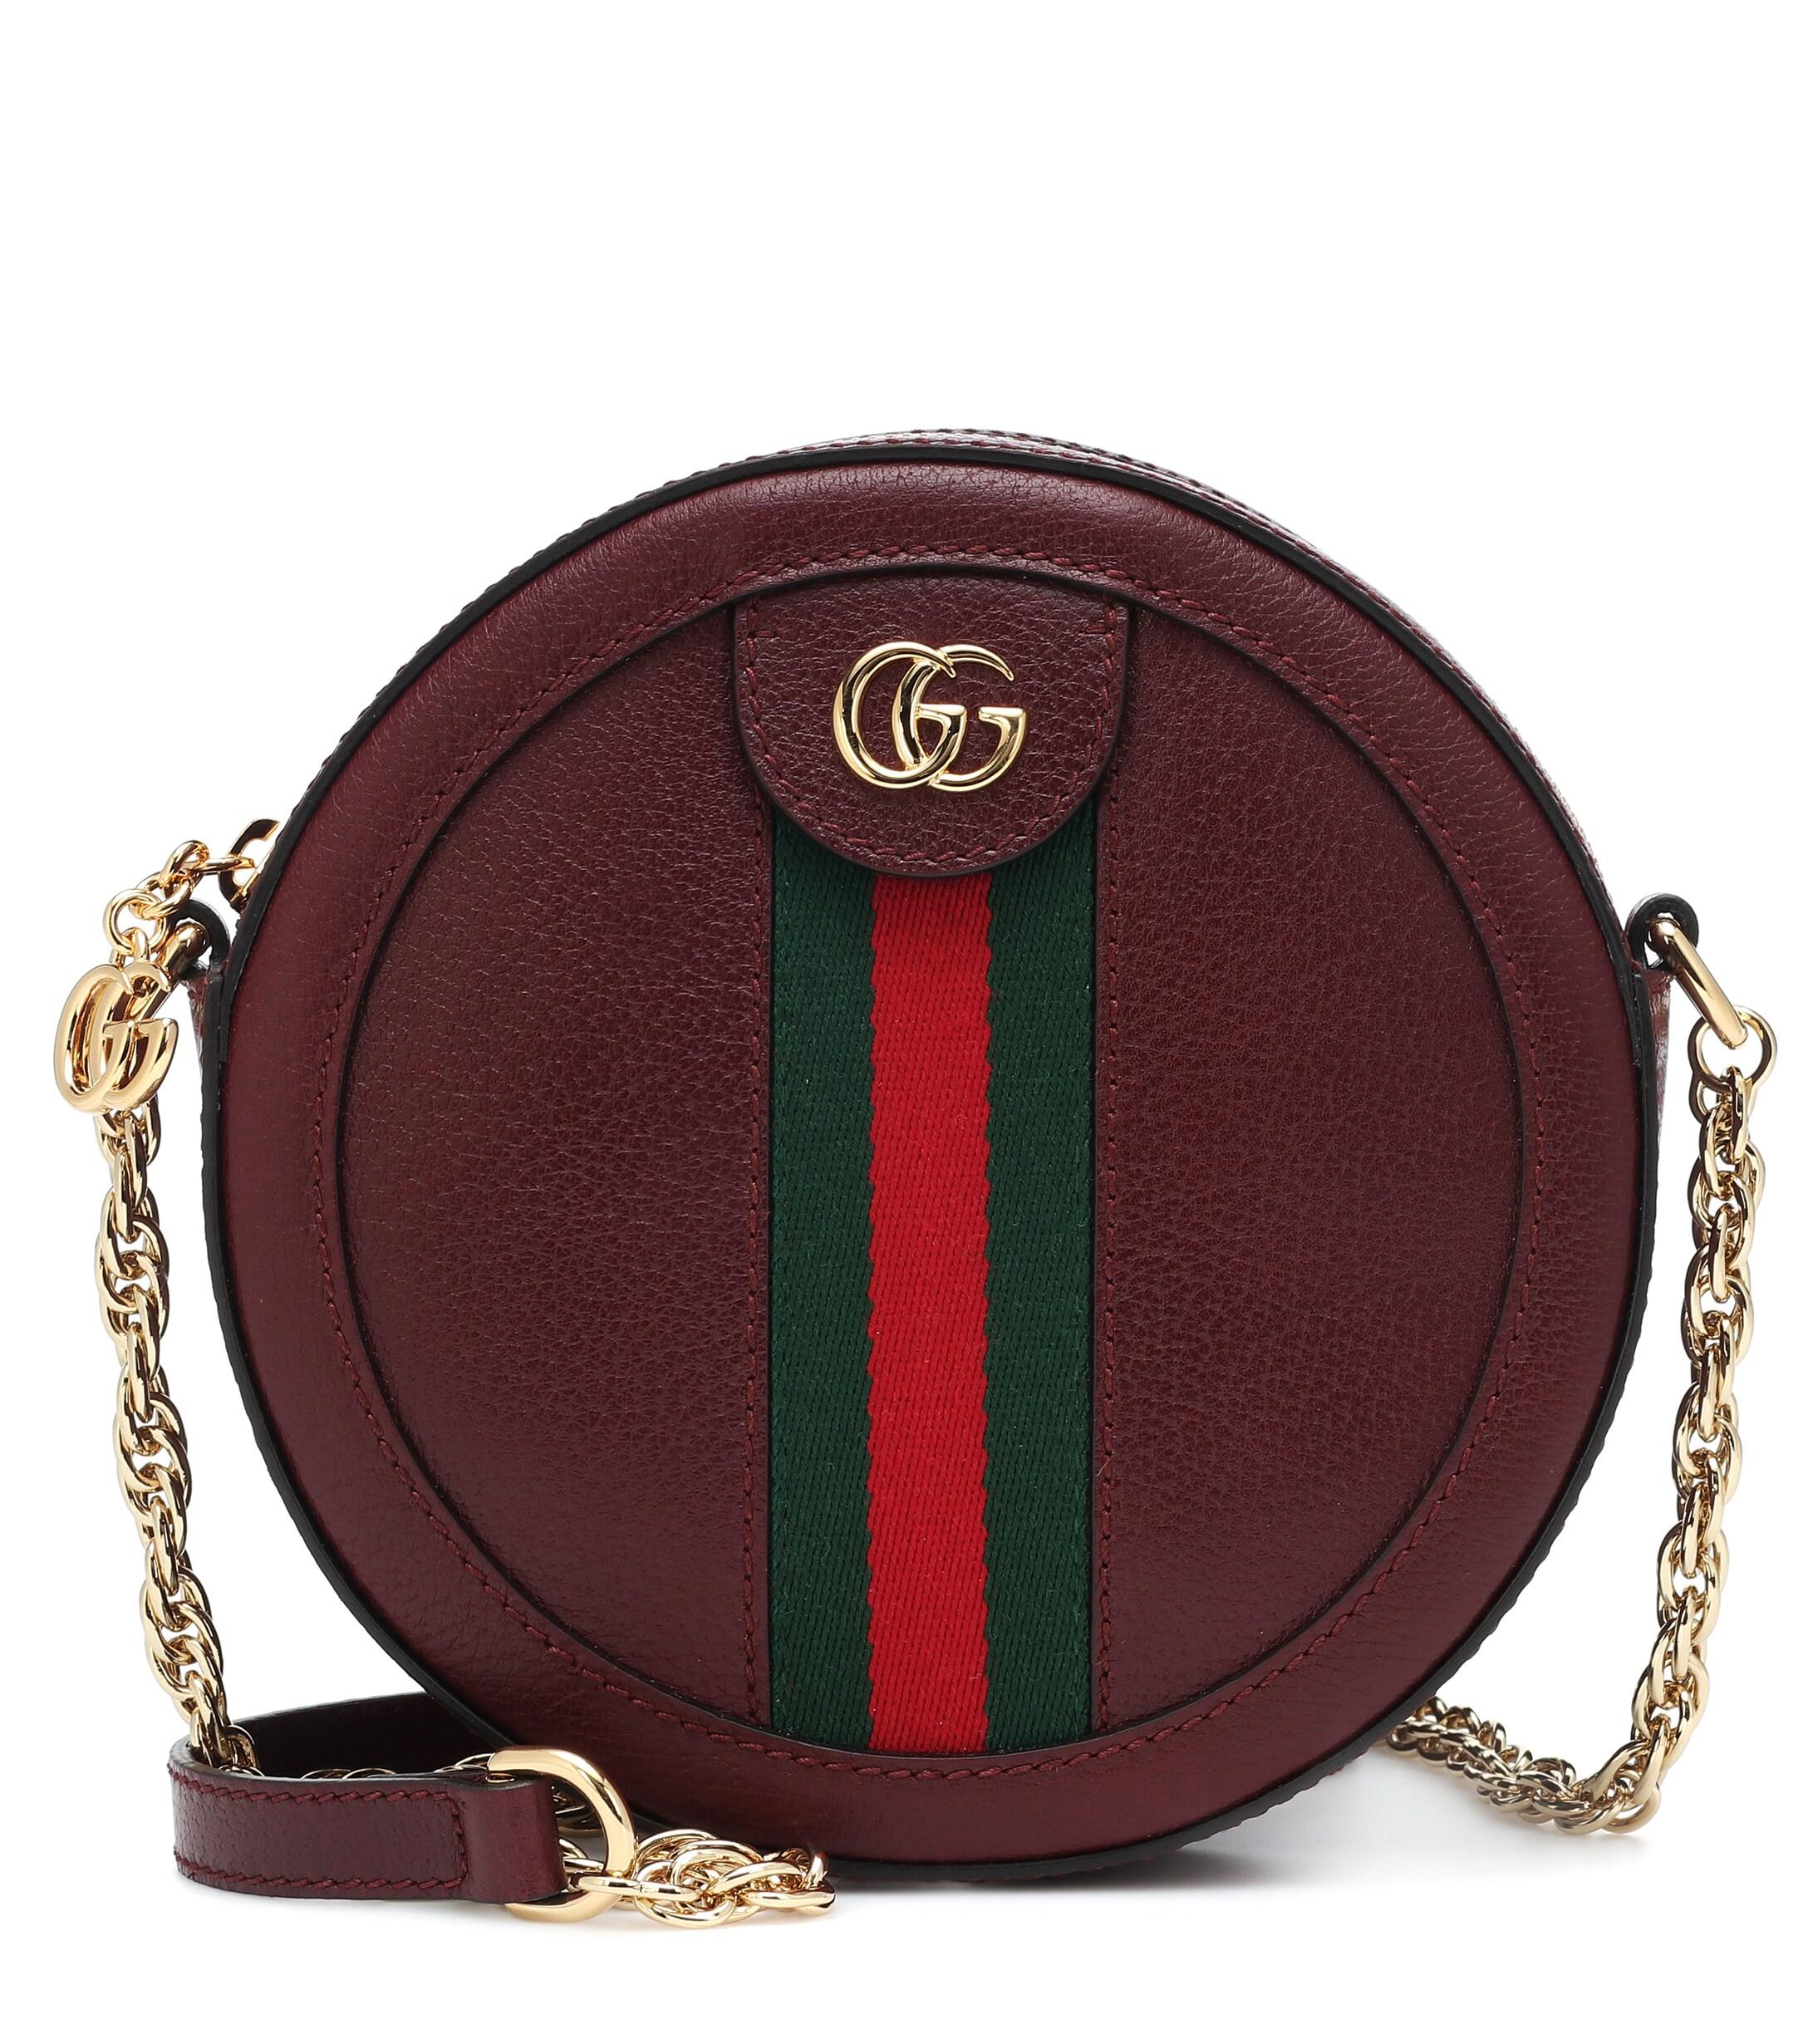 Gucci Ophidia Mini Round Leather Shoulder Bag in Dark Red (Red) - Lyst